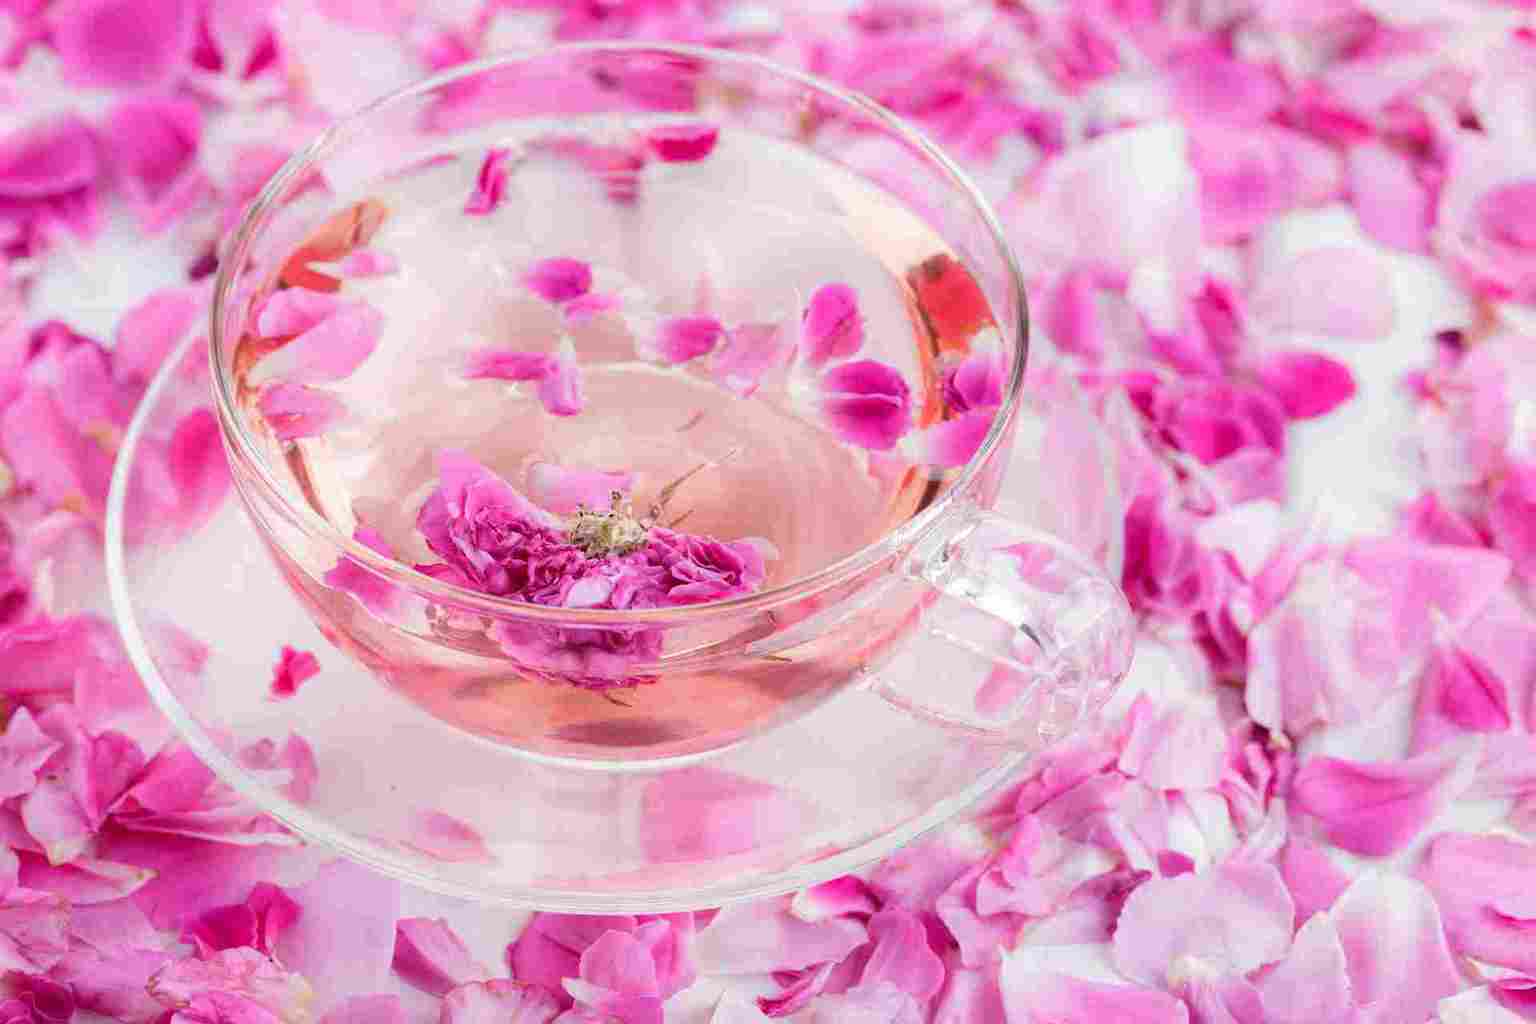 10 Substitutes for Rose Water